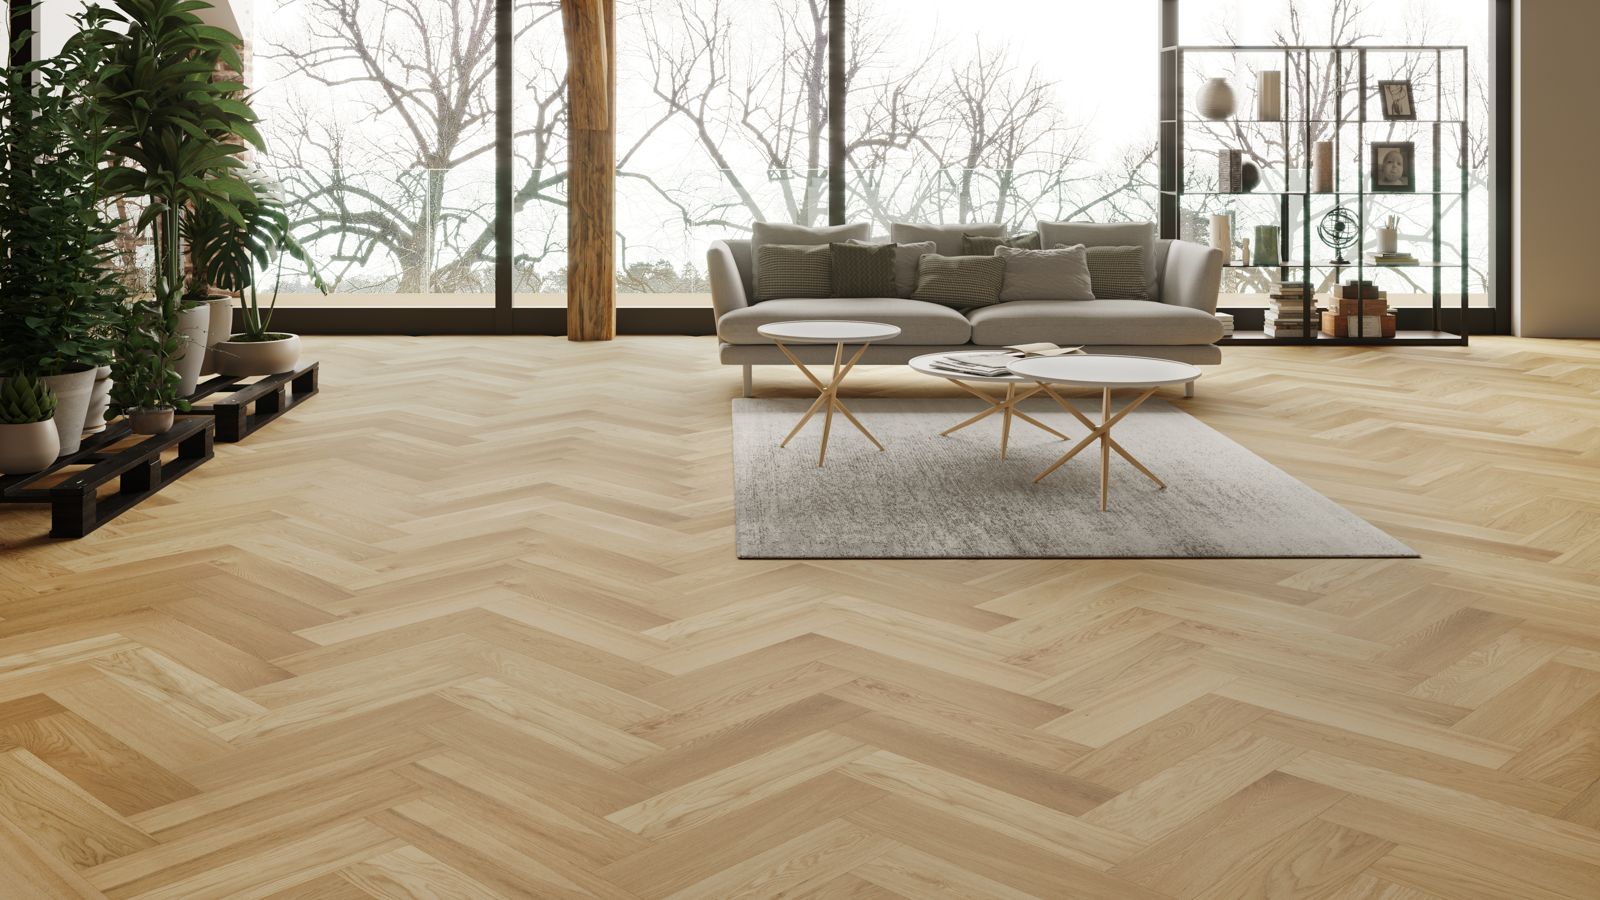 Parquet Flooring Cost Guide Free, How Much Does It Cost To Install Parquet Flooring Uk